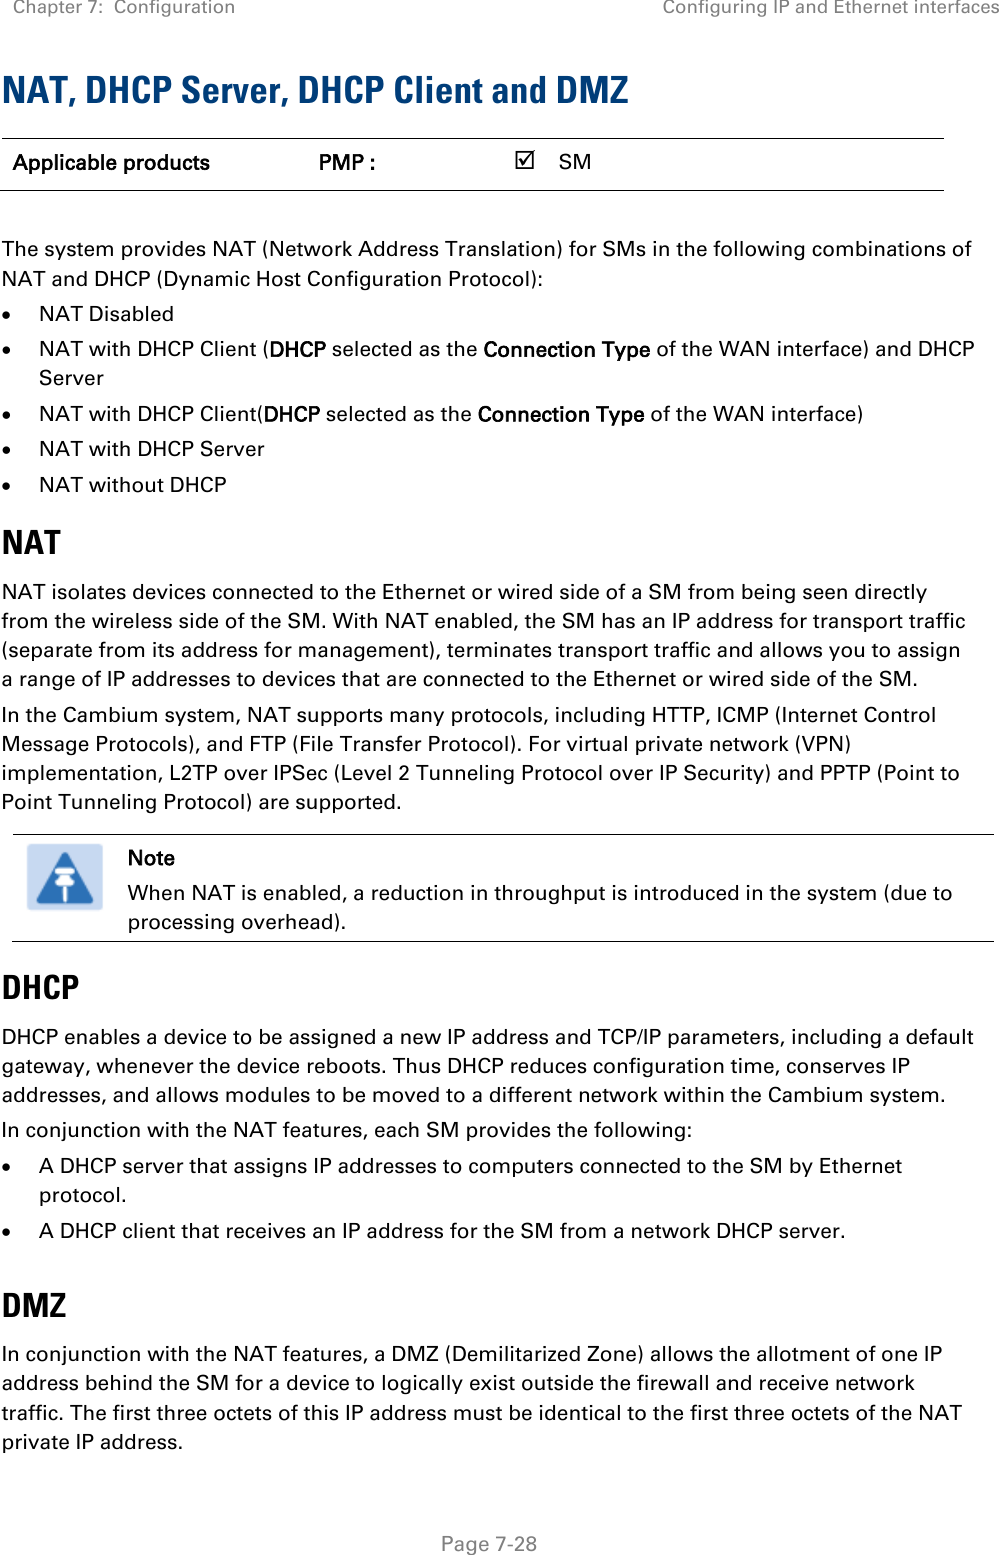 Chapter 7:  Configuration Configuring IP and Ethernet interfaces   Page 7-28 NAT, DHCP Server, DHCP Client and DMZ Applicable products PMP :    SM       The system provides NAT (Network Address Translation) for SMs in the following combinations of NAT and DHCP (Dynamic Host Configuration Protocol): • NAT Disabled • NAT with DHCP Client (DHCP selected as the Connection Type of the WAN interface) and DHCP Server • NAT with DHCP Client(DHCP selected as the Connection Type of the WAN interface) • NAT with DHCP Server • NAT without DHCP NAT NAT isolates devices connected to the Ethernet or wired side of a SM from being seen directly from the wireless side of the SM. With NAT enabled, the SM has an IP address for transport traffic (separate from its address for management), terminates transport traffic and allows you to assign a range of IP addresses to devices that are connected to the Ethernet or wired side of the SM.  In the Cambium system, NAT supports many protocols, including HTTP, ICMP (Internet Control Message Protocols), and FTP (File Transfer Protocol). For virtual private network (VPN) implementation, L2TP over IPSec (Level 2 Tunneling Protocol over IP Security) and PPTP (Point to Point Tunneling Protocol) are supported.   Note When NAT is enabled, a reduction in throughput is introduced in the system (due to processing overhead). DHCP DHCP enables a device to be assigned a new IP address and TCP/IP parameters, including a default gateway, whenever the device reboots. Thus DHCP reduces configuration time, conserves IP addresses, and allows modules to be moved to a different network within the Cambium system. In conjunction with the NAT features, each SM provides the following: • A DHCP server that assigns IP addresses to computers connected to the SM by Ethernet protocol. • A DHCP client that receives an IP address for the SM from a network DHCP server.  DMZ In conjunction with the NAT features, a DMZ (Demilitarized Zone) allows the allotment of one IP address behind the SM for a device to logically exist outside the firewall and receive network traffic. The first three octets of this IP address must be identical to the first three octets of the NAT private IP address.  